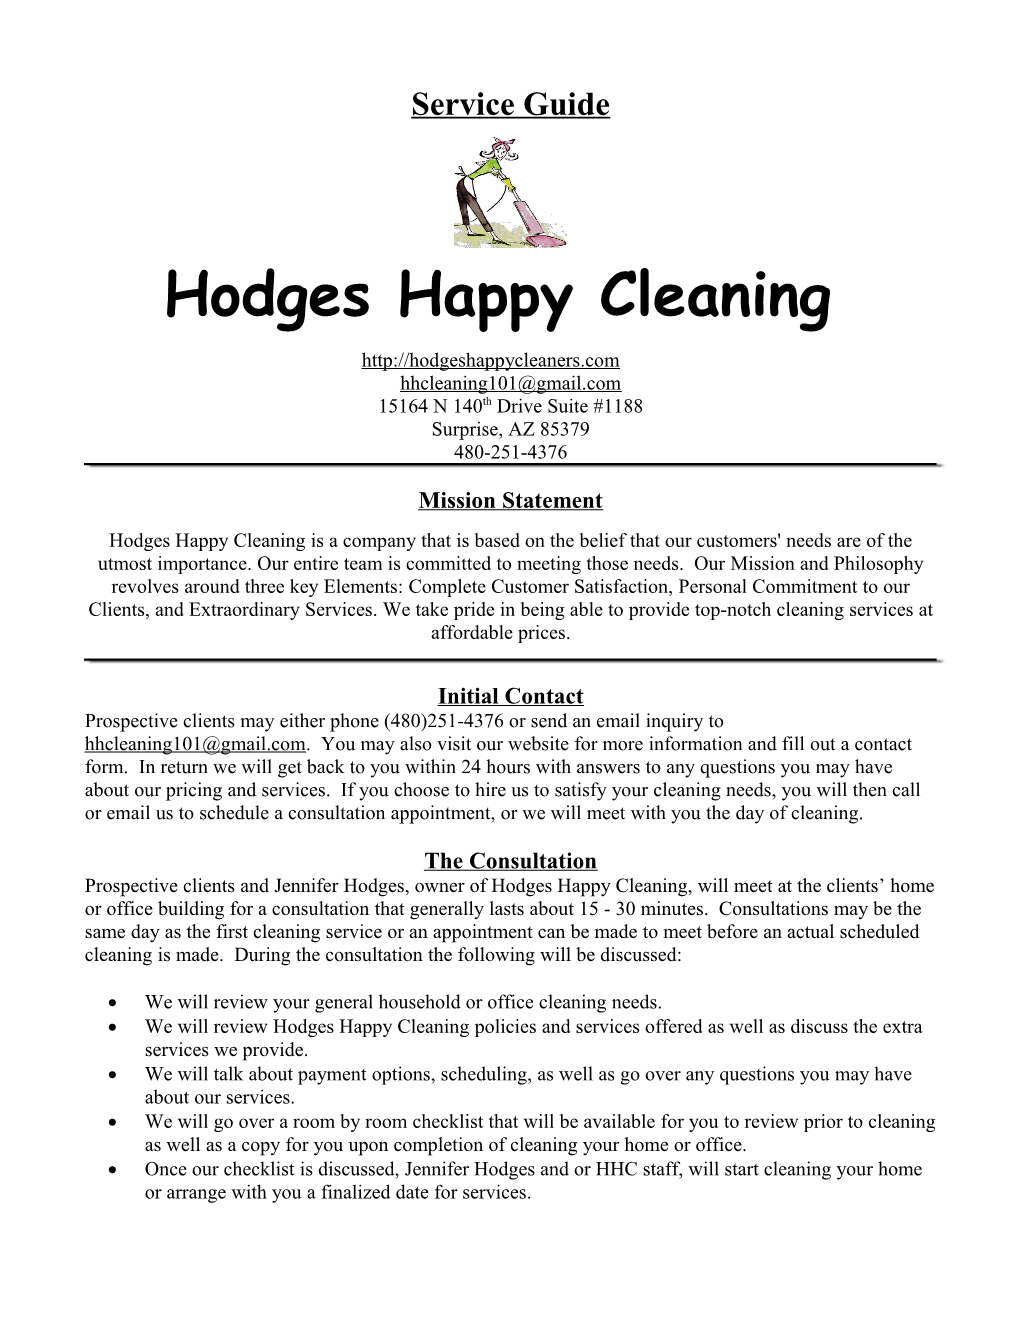 Hodges Happy Cleaning